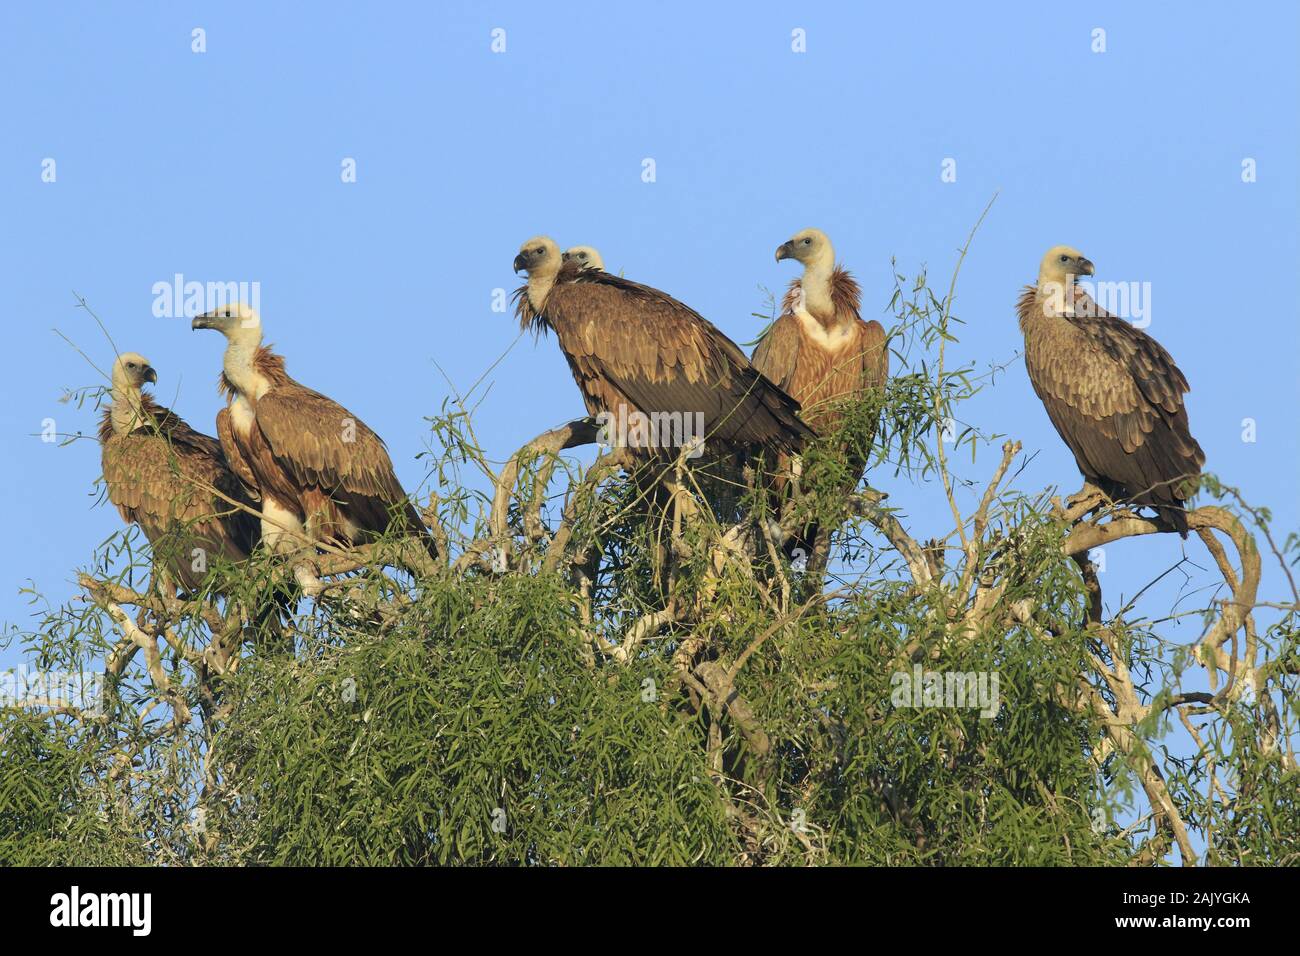 Vultures in Rajasthan Stock Photo